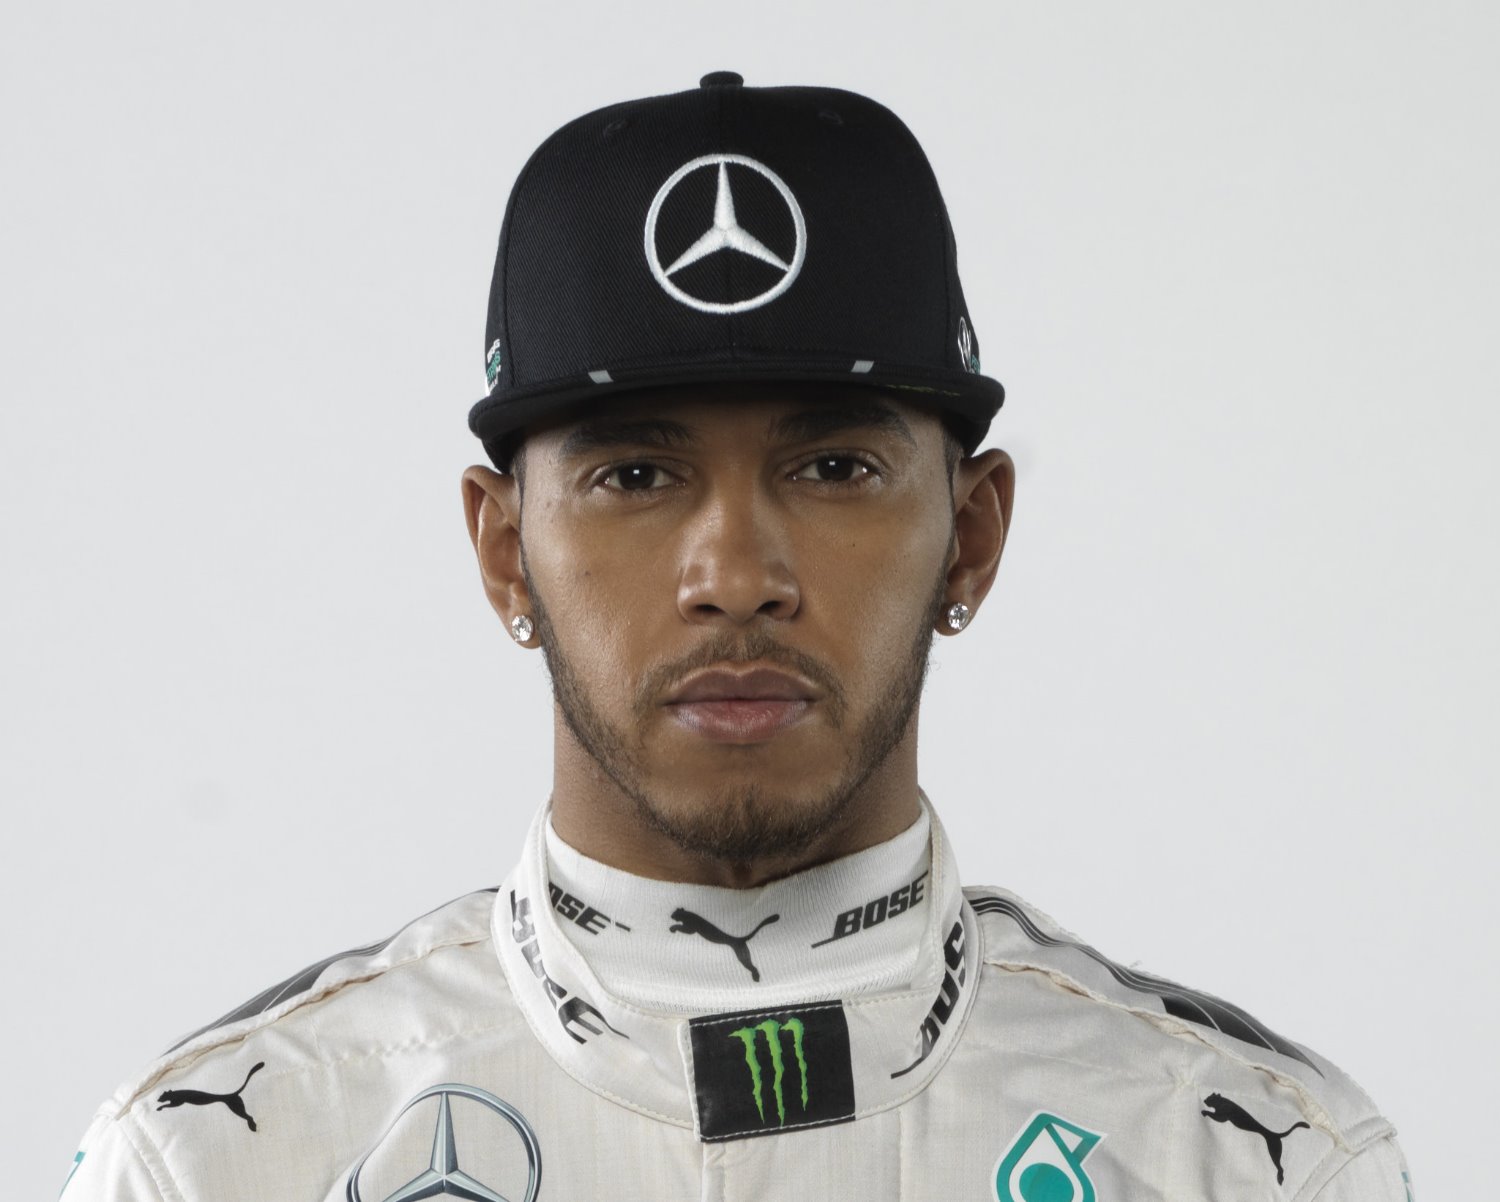 Lewis Hamilton does whatever he wants to